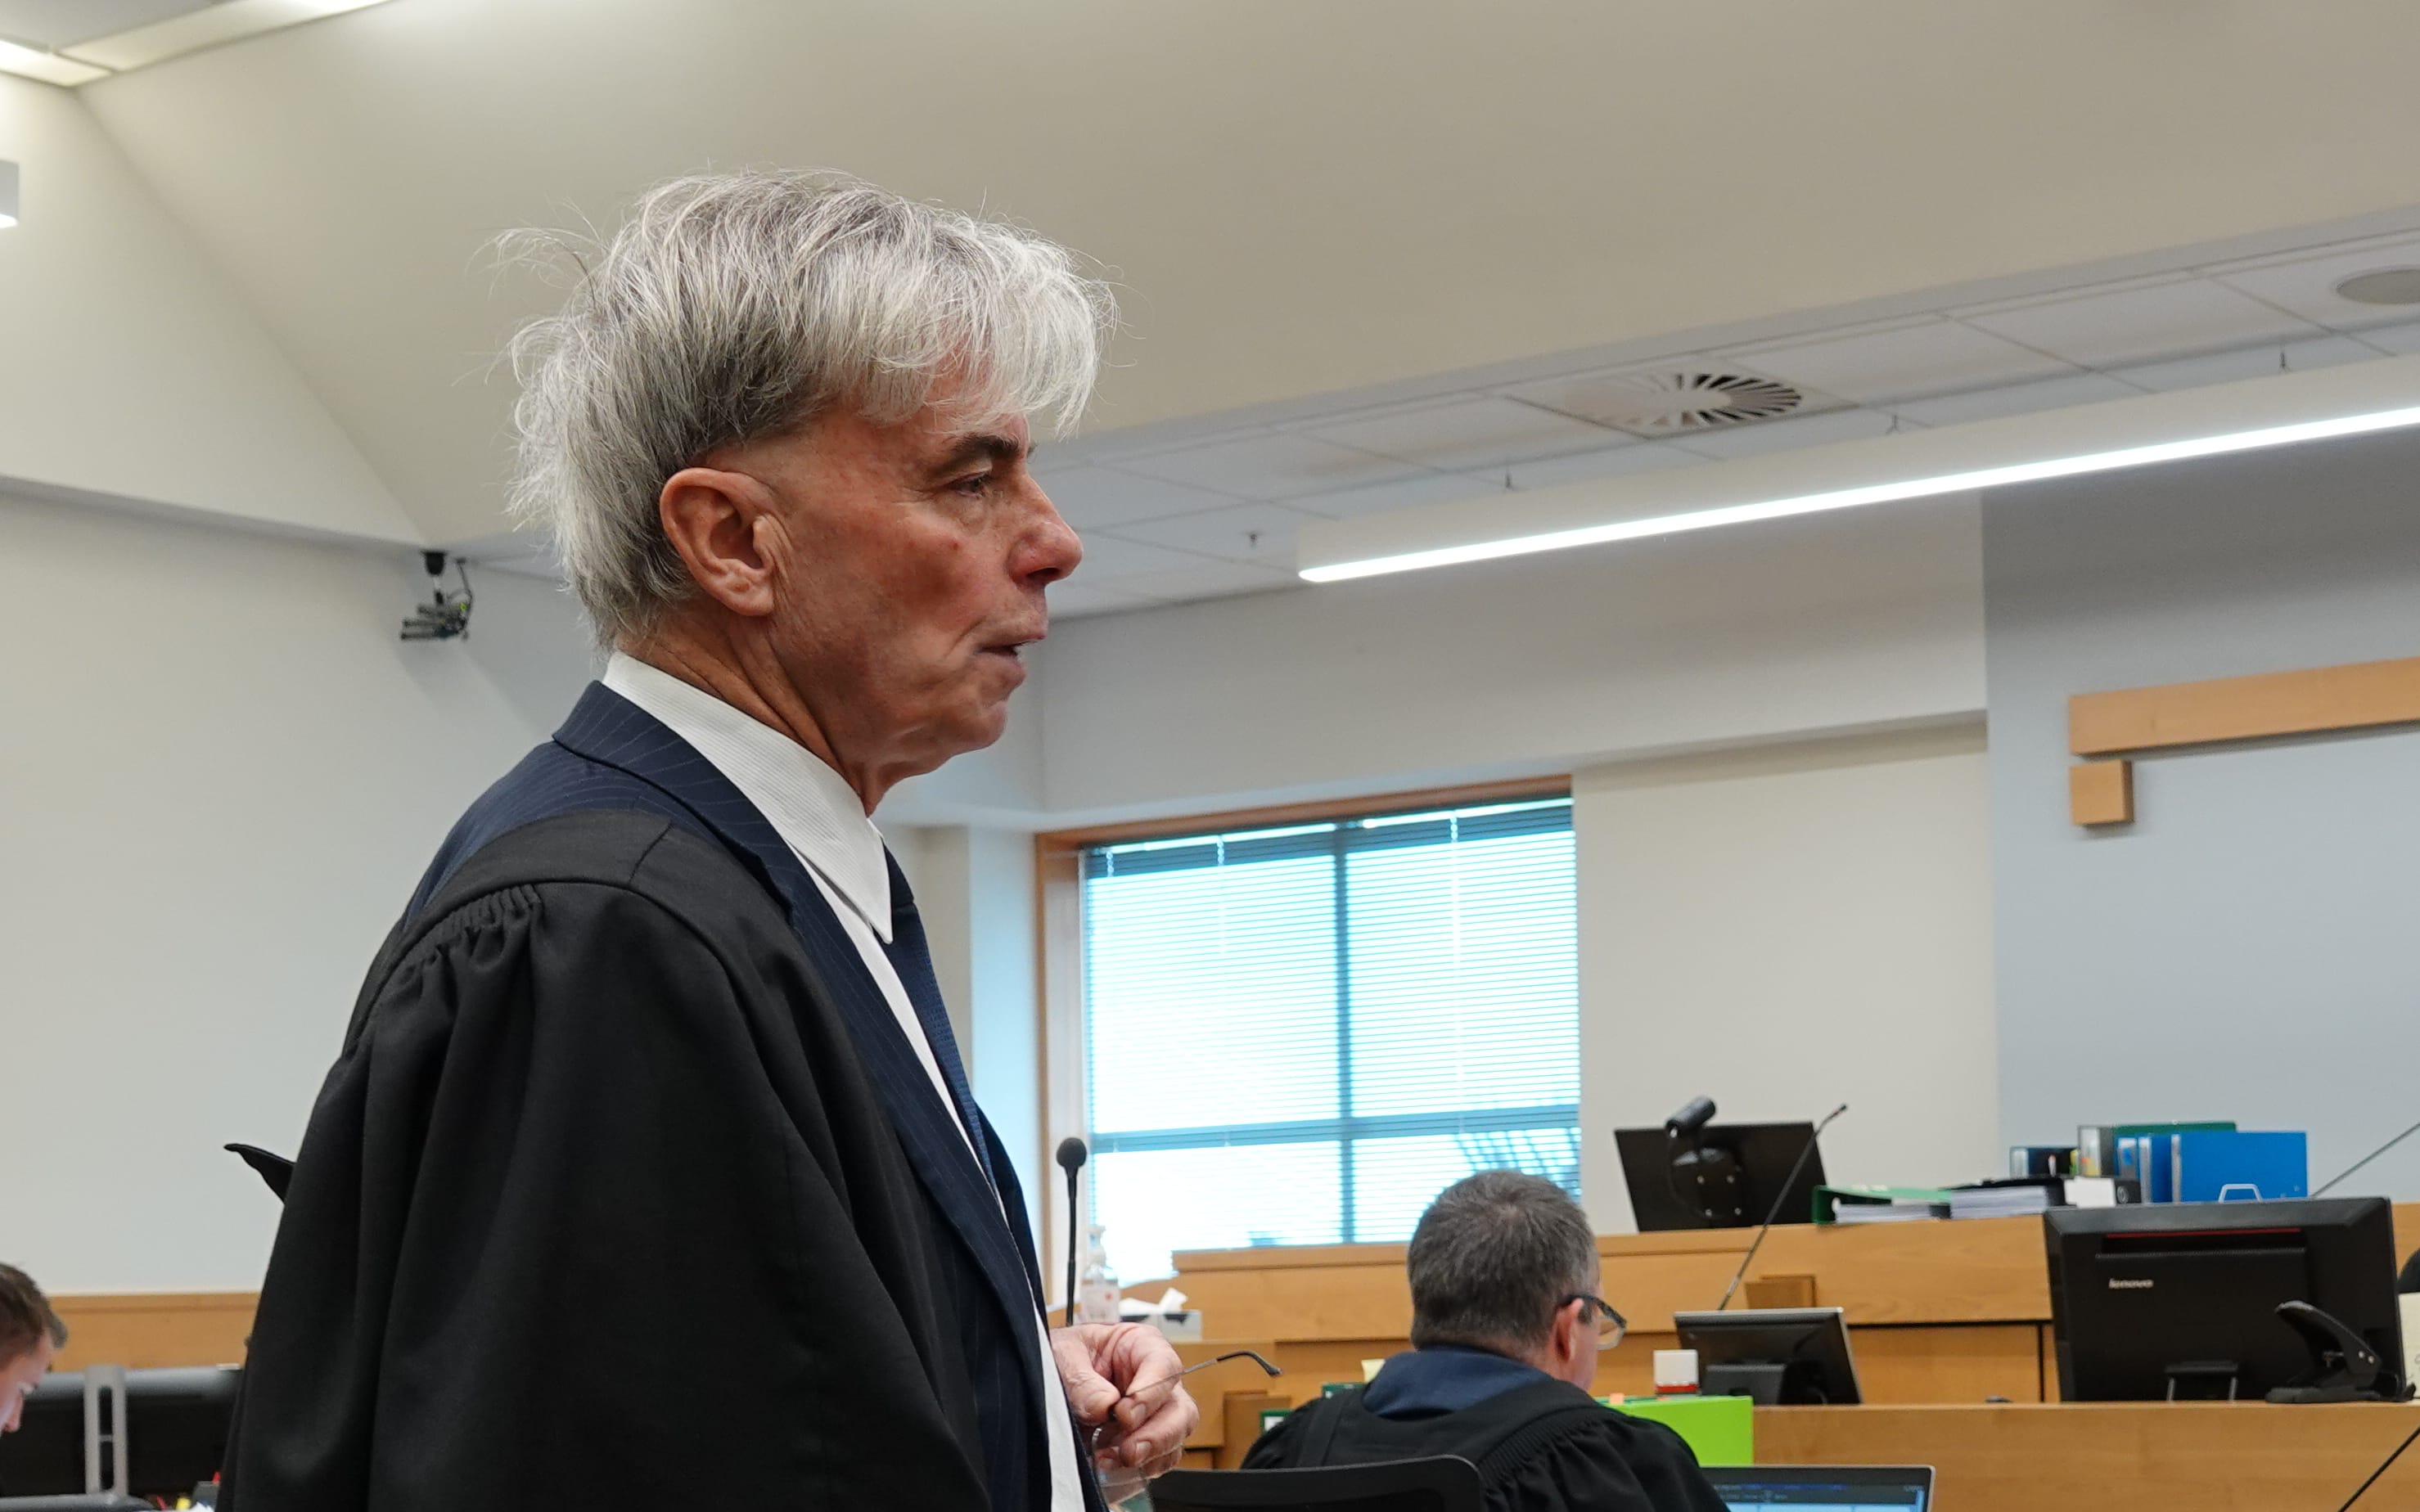 Samuel Hemuera Pou's defence counsel Arthur Fairley addressing the jury in the High Court at Whangārei.